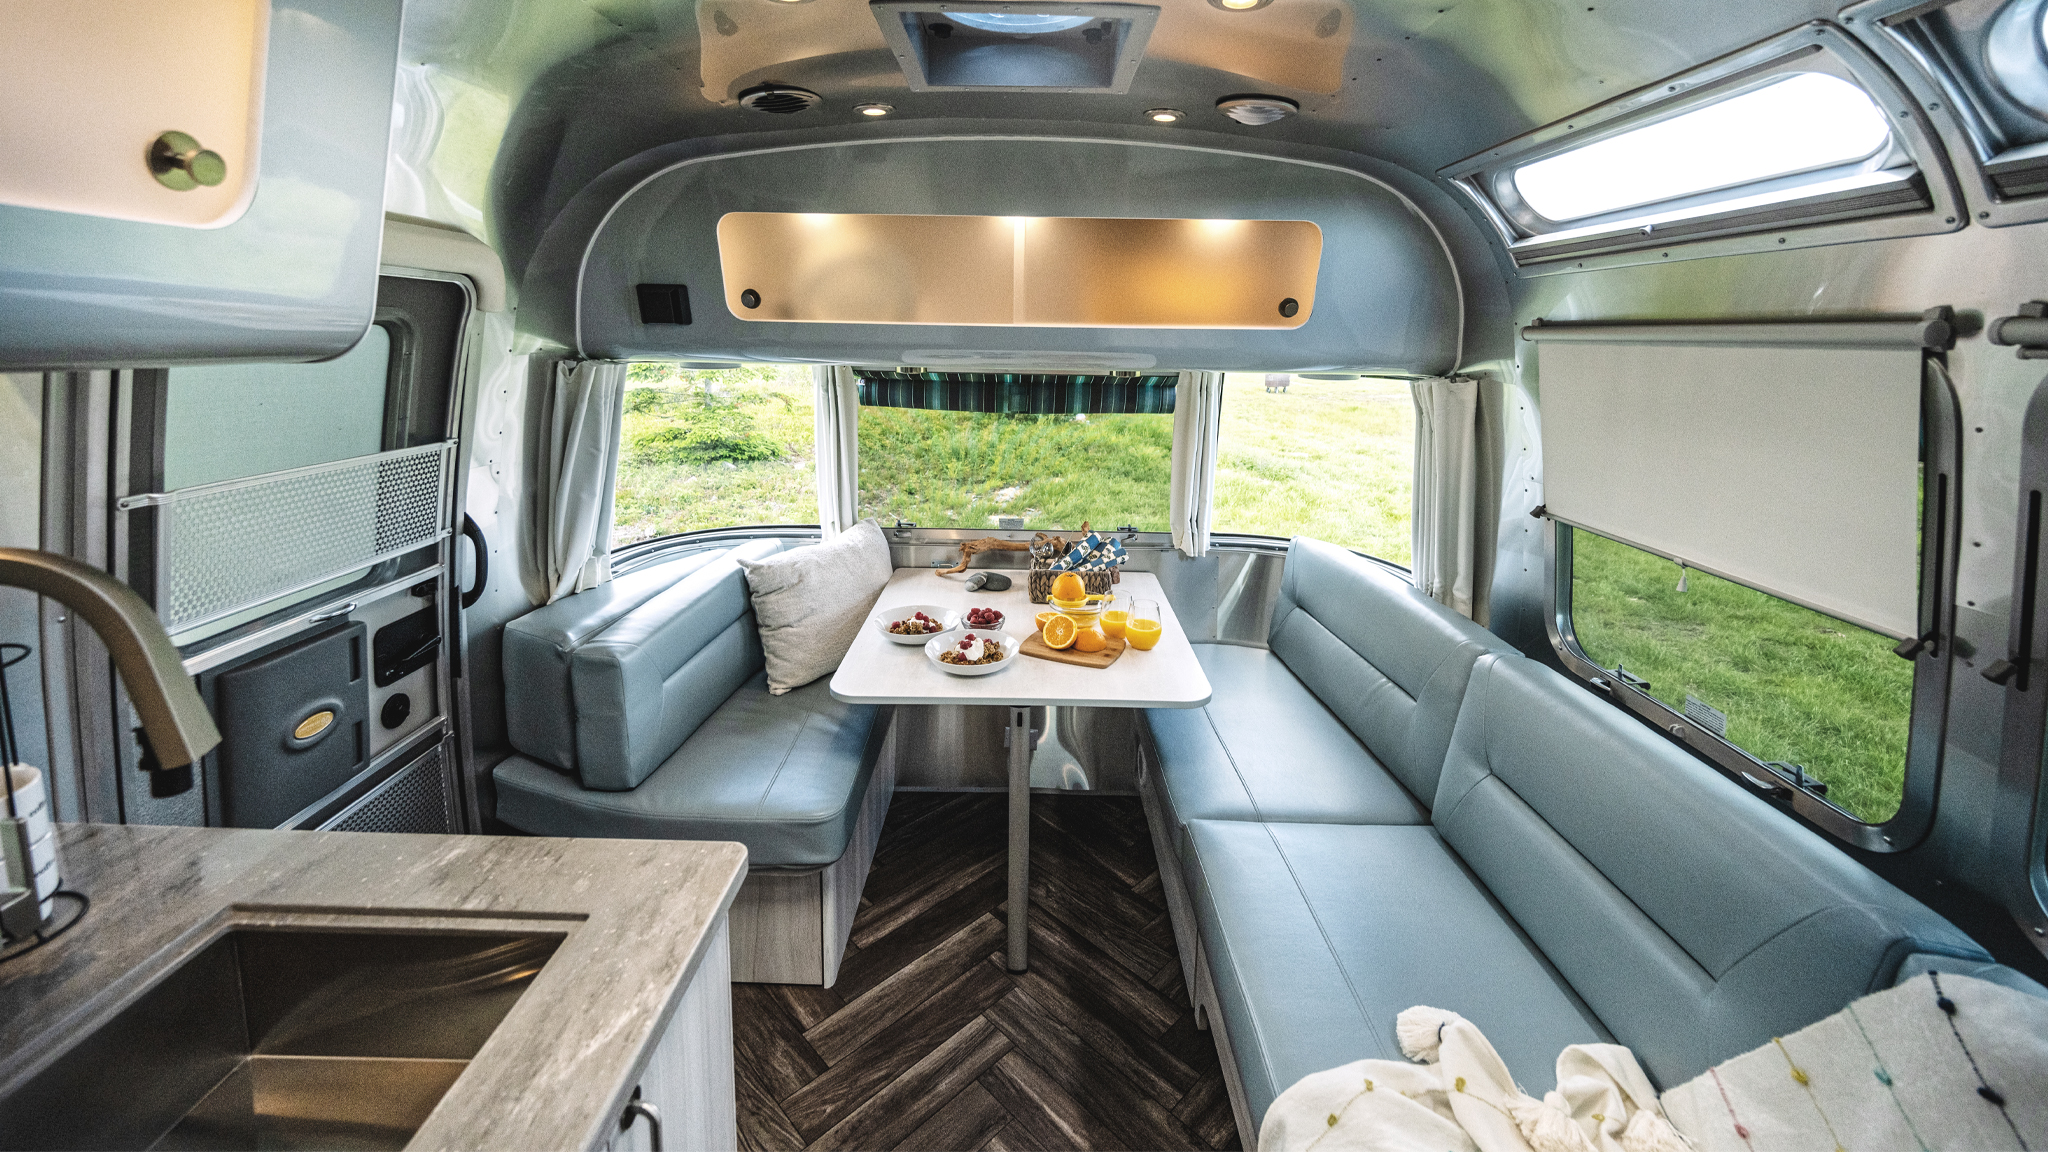 Peek Inside Our Airstream » Just 5 More Minutes